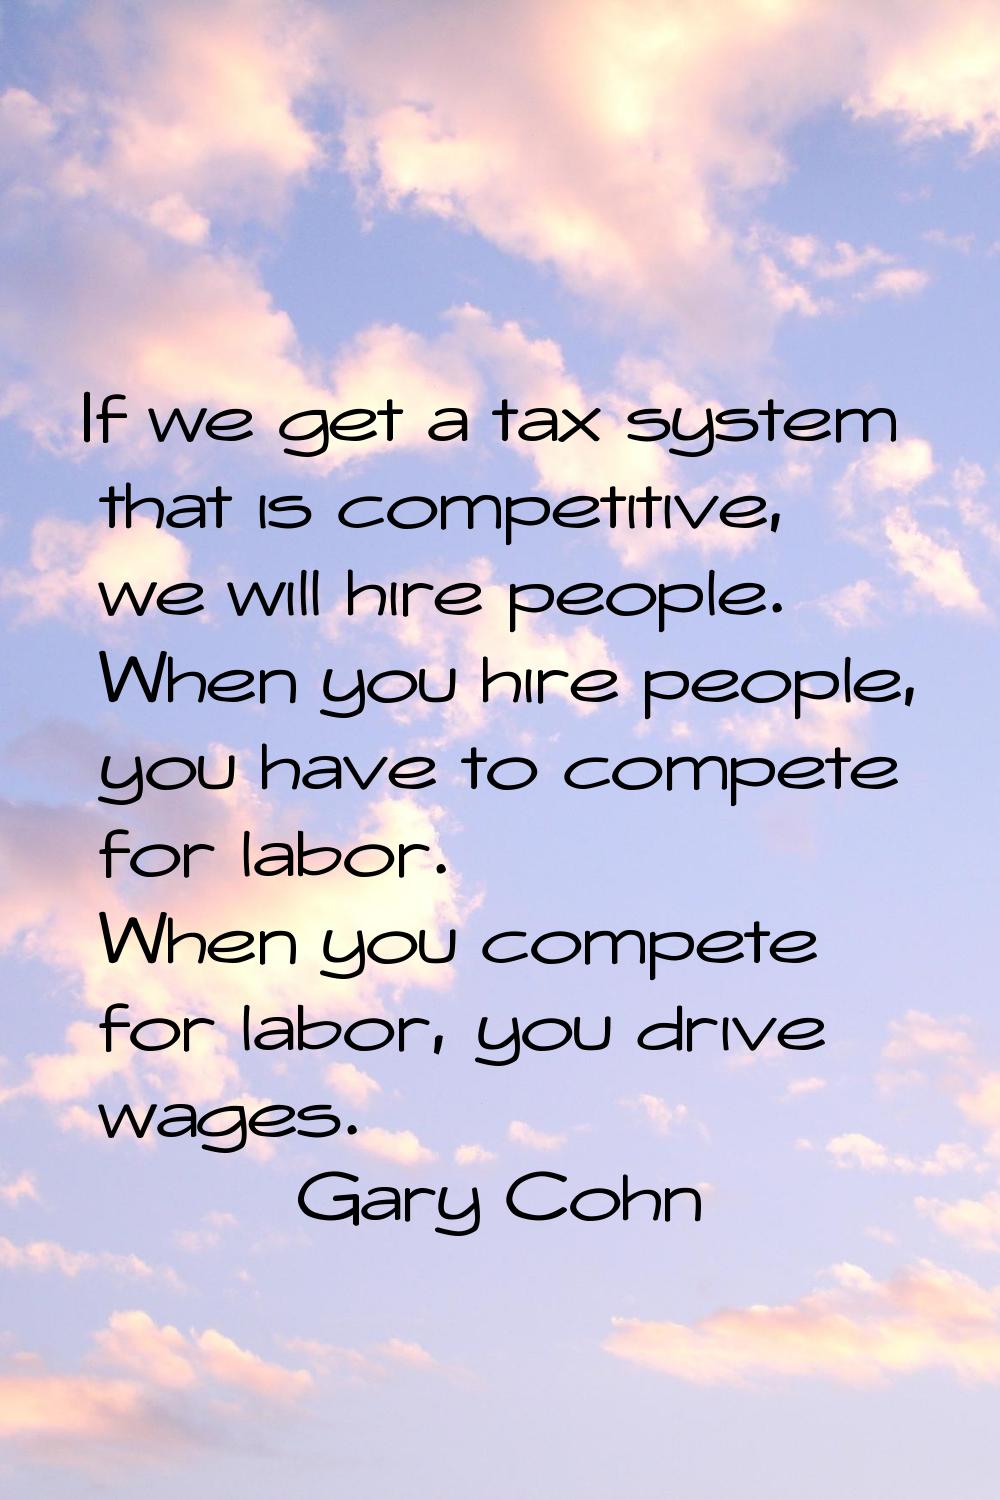 If we get a tax system that is competitive, we will hire people. When you hire people, you have to 